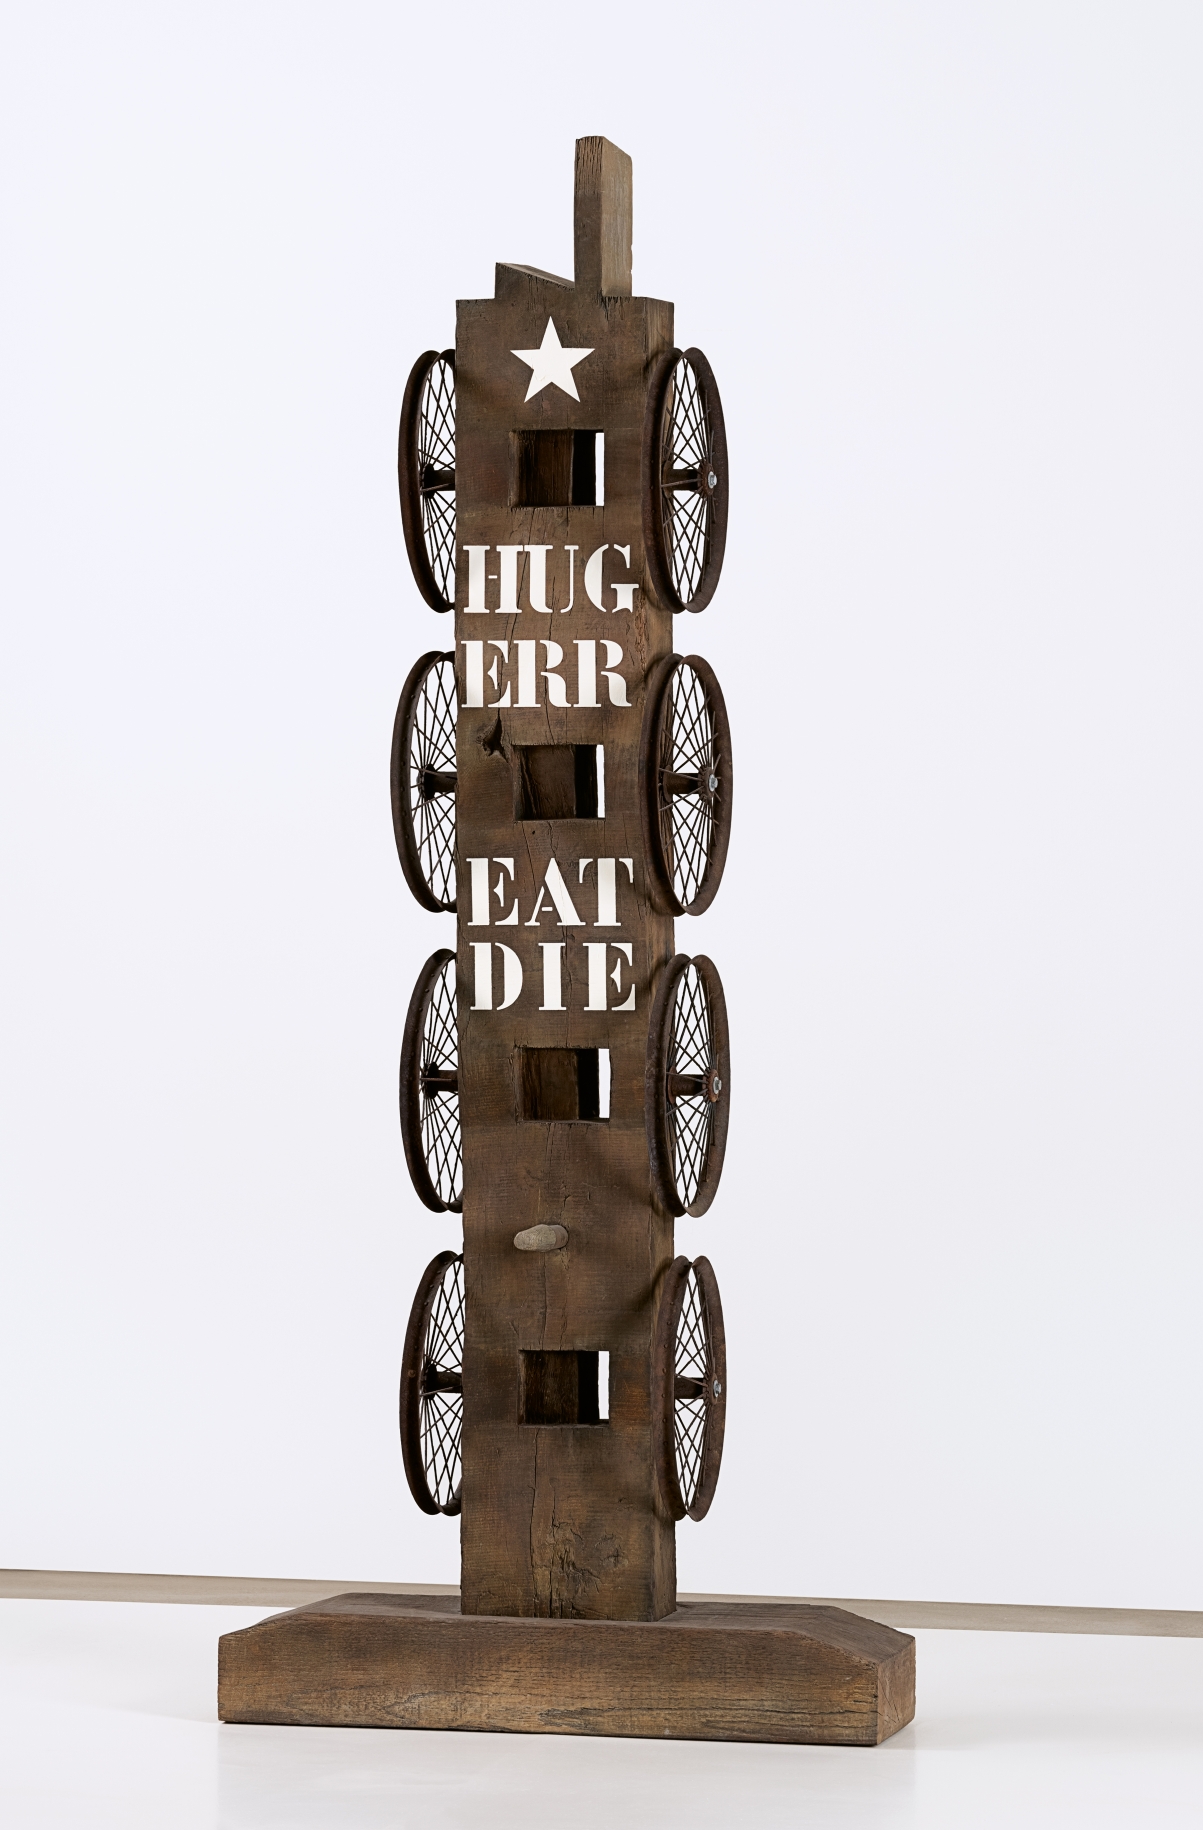 A 83 7/8 by 35 1/2 by 11 13/16 inch painted bronze sculpture consisting of a beam with a haunched tenon on a base. Four wheels run down the left and right sides of the sculpture. At the front top is a white star, below it the words "Hug," "Err," "Eat," and "Die" are painted in white stenciled letters.